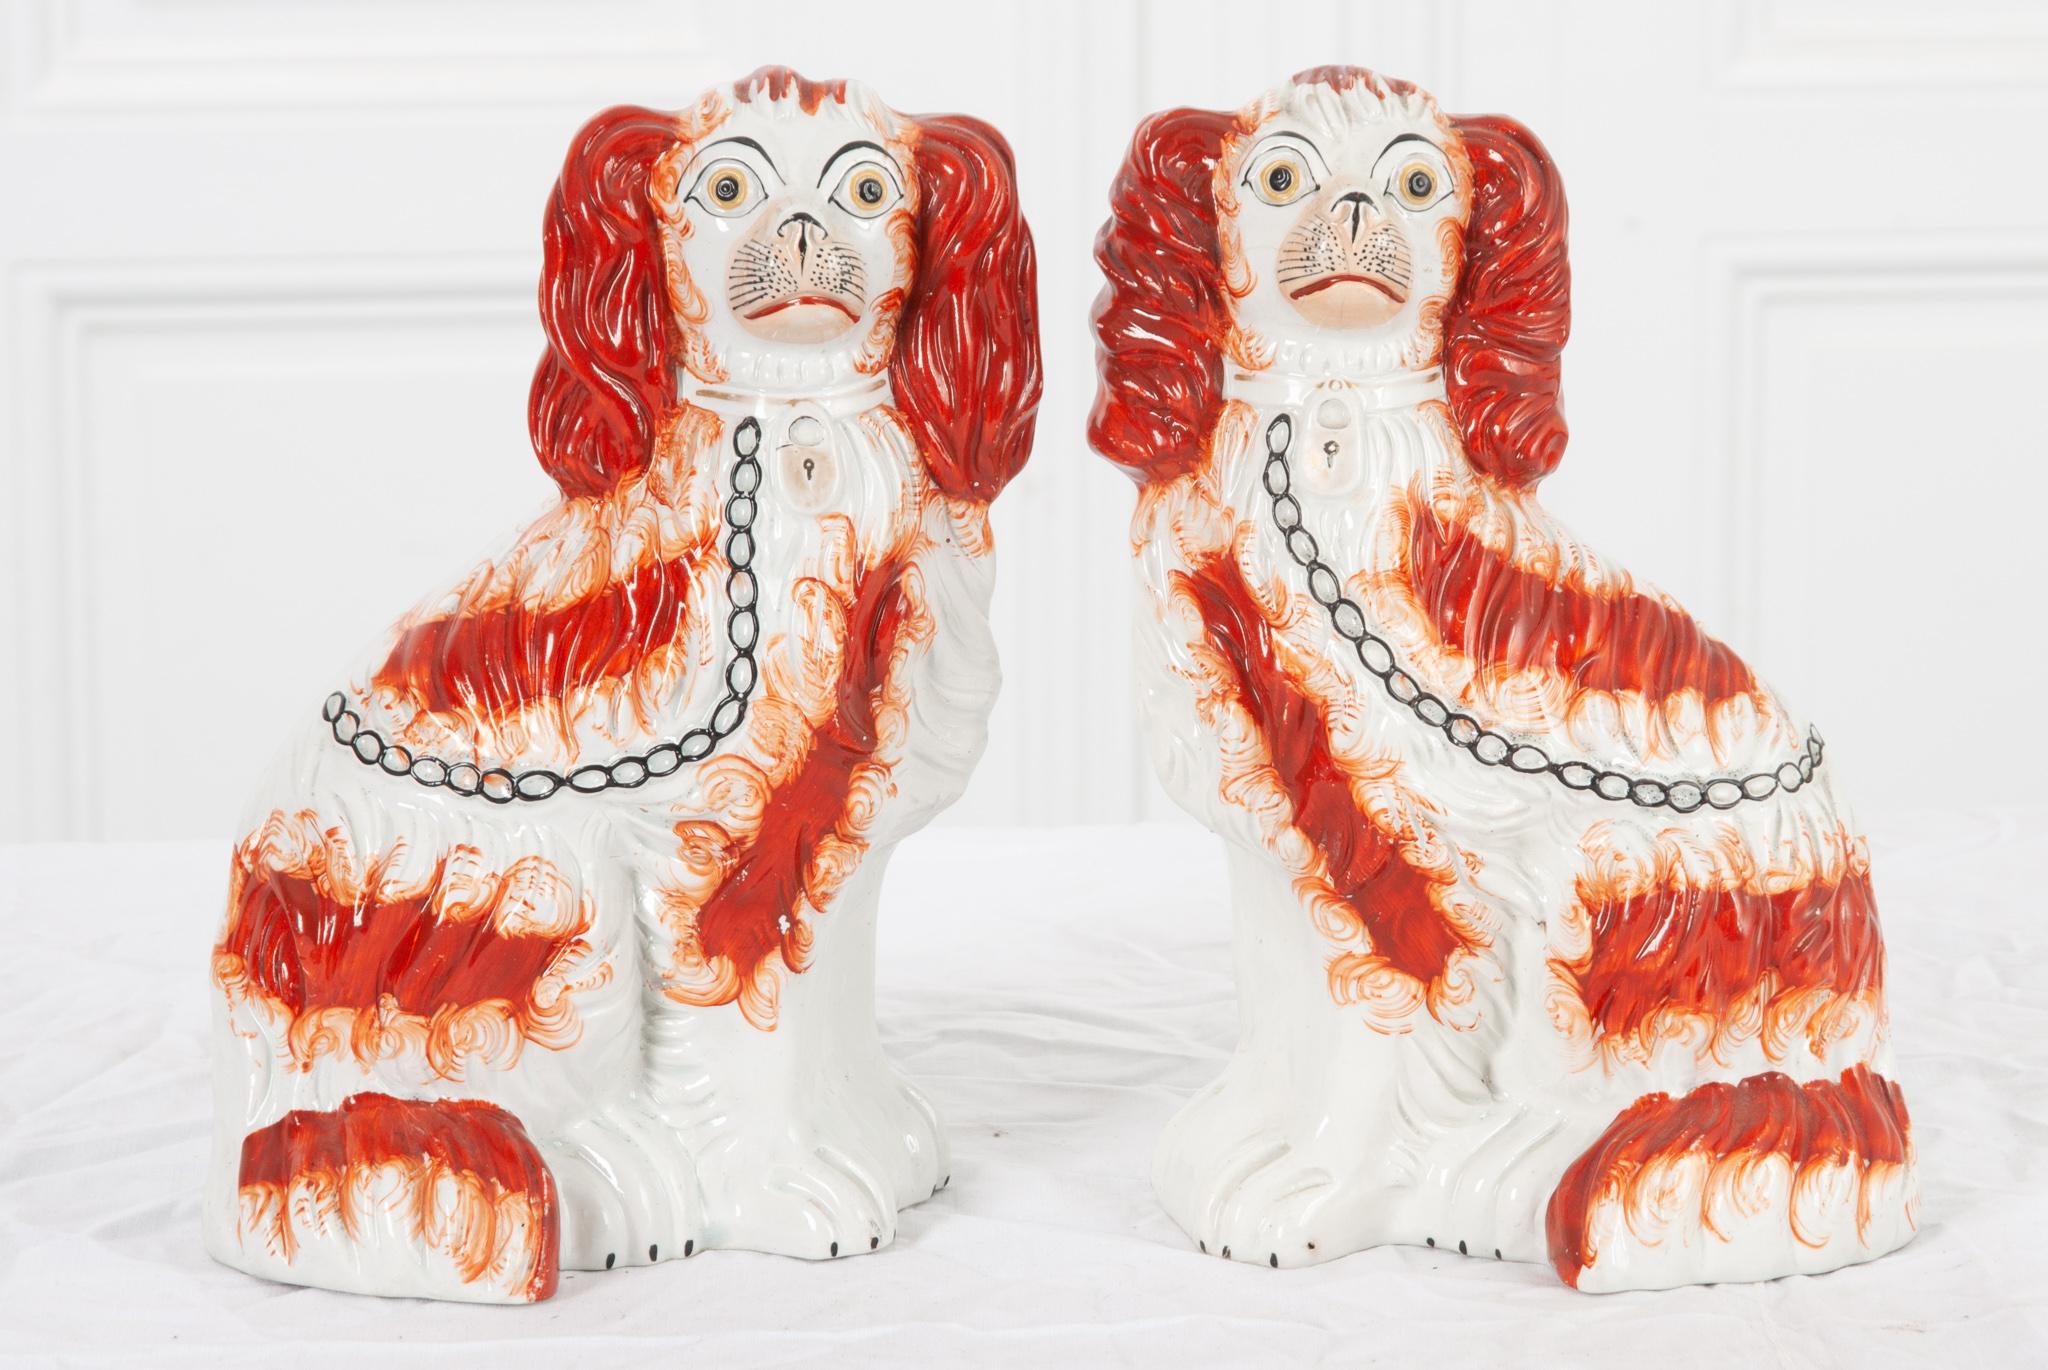 This lovely pair of Staffordshire Dogs are named so for the area in England they originate. Two seated King Charles Spaniel dogs with delicate detail throughout; gold and rust colored fur, a black chain leash, and worn gold collar with a lock. Make